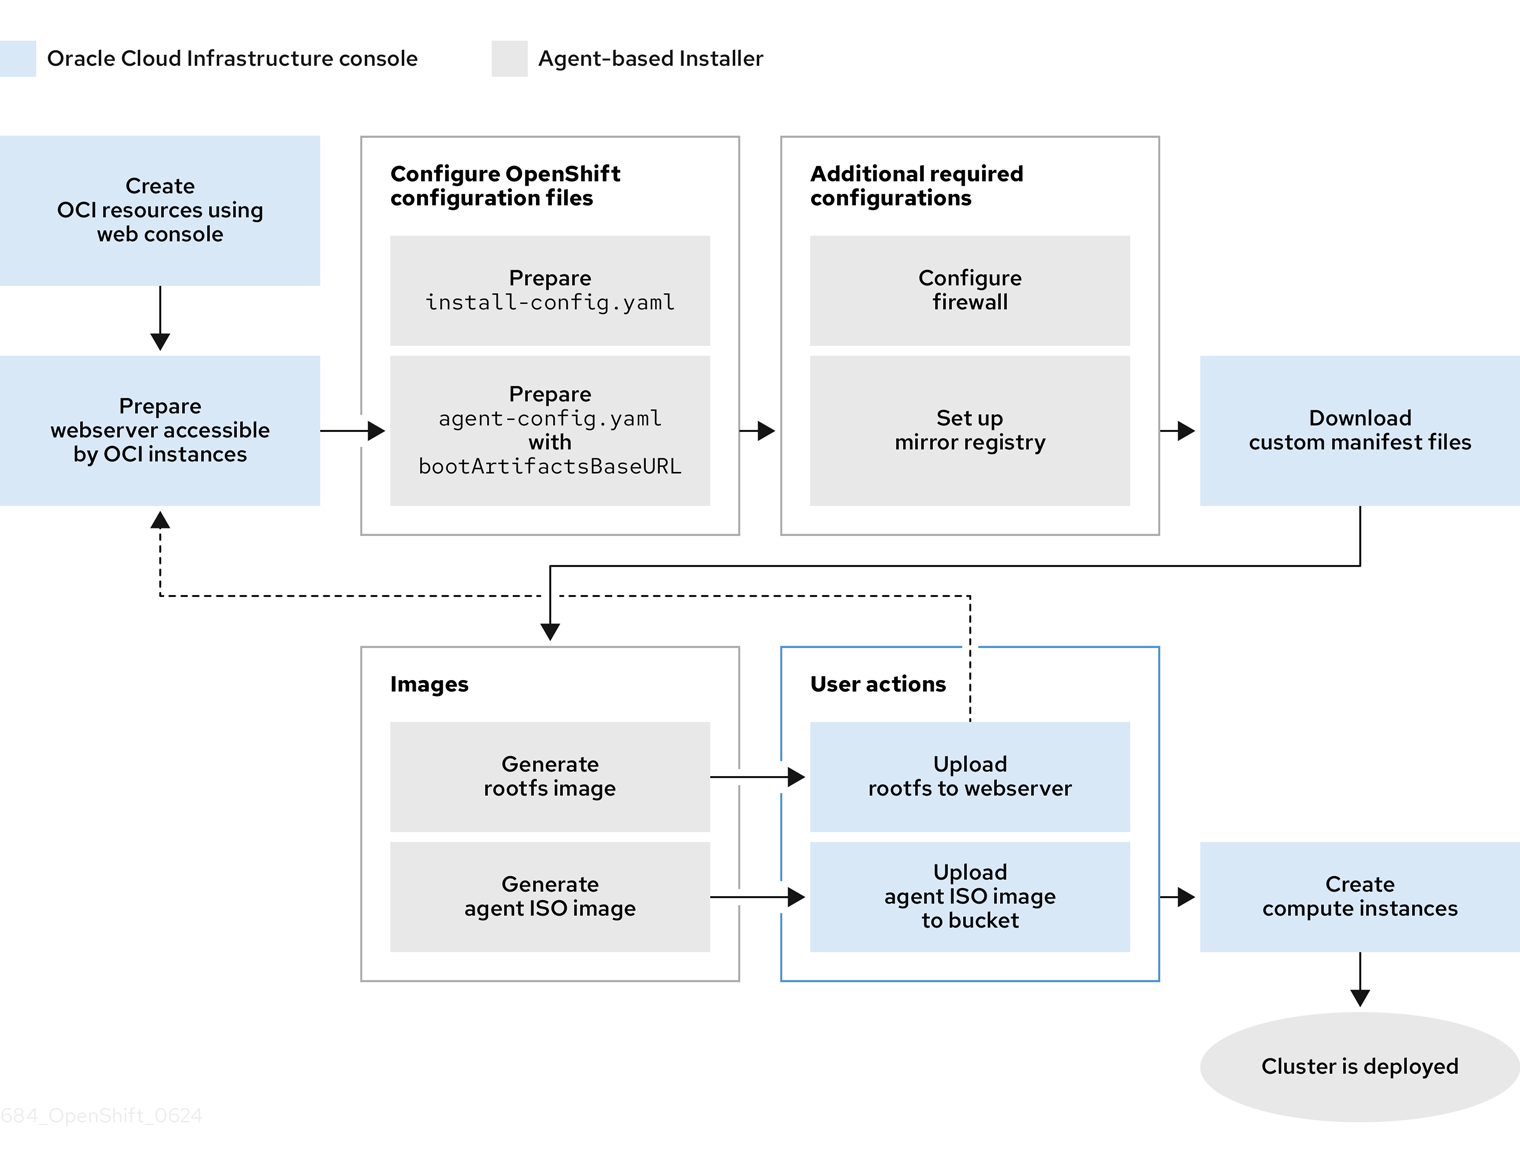 Image of a high-level workflow for using the Agent-based installer in a disconnected environment to install a cluster on OCI